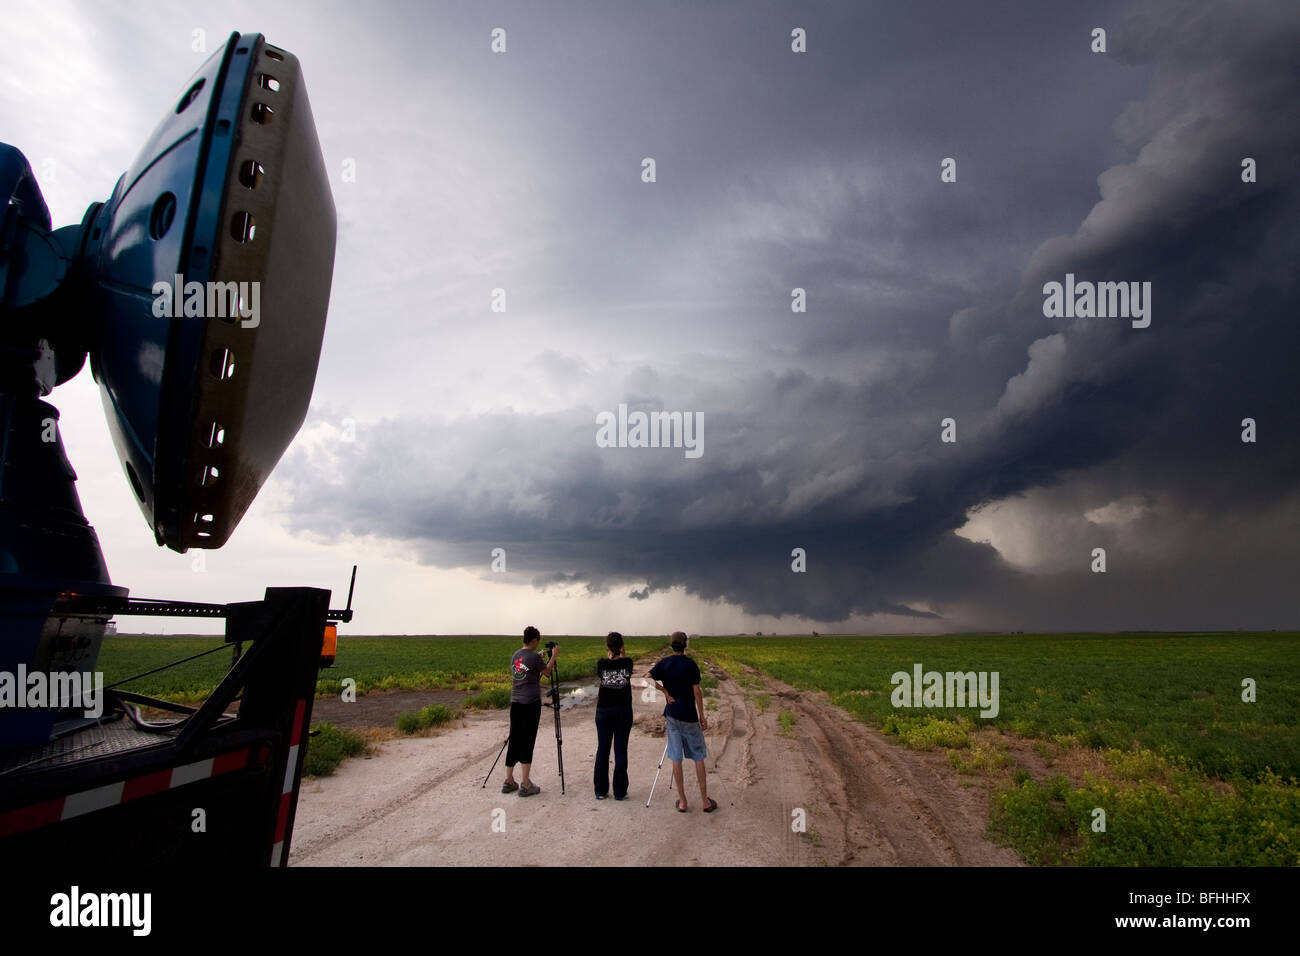 Storm chasers participating in Project Vortex 2 near Dodge City, Kansas, USA, June 9, 2009. Stock Photo